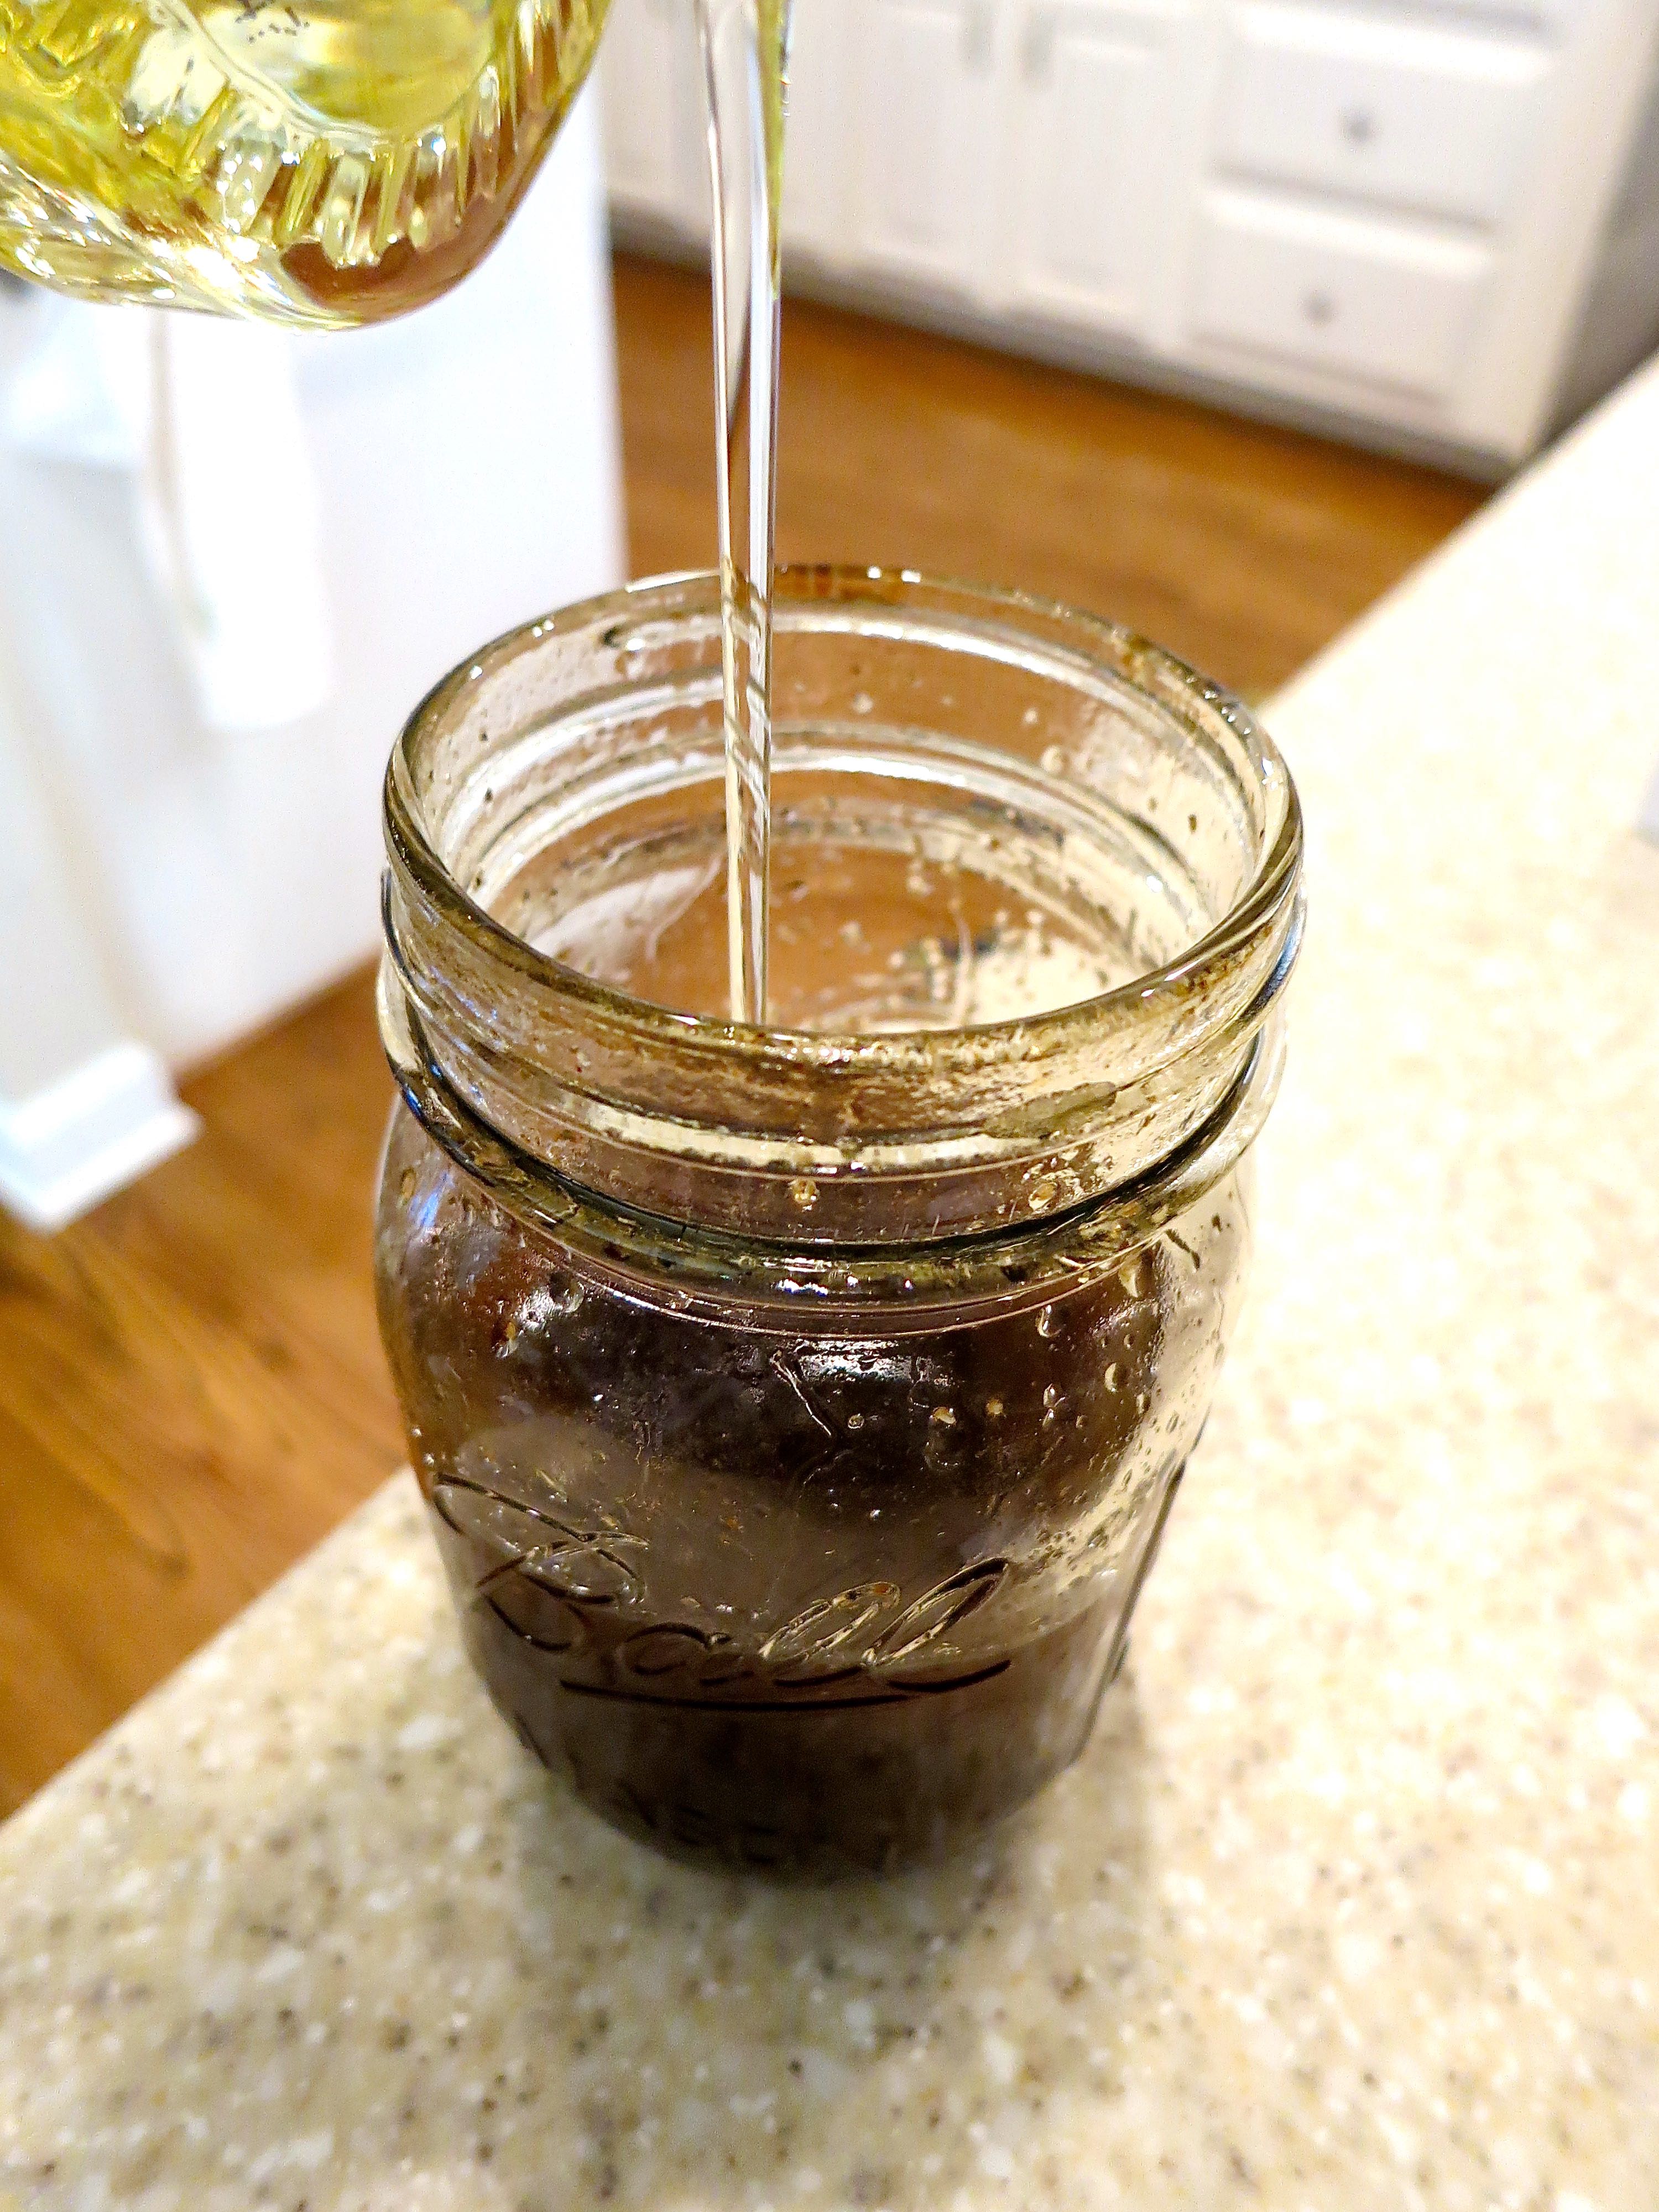 Easy Basic Vinaigrette...No need to buy store-bought salad dressings! With this basic recipe you can add different seasonings and additives for a wide variety of dressings.